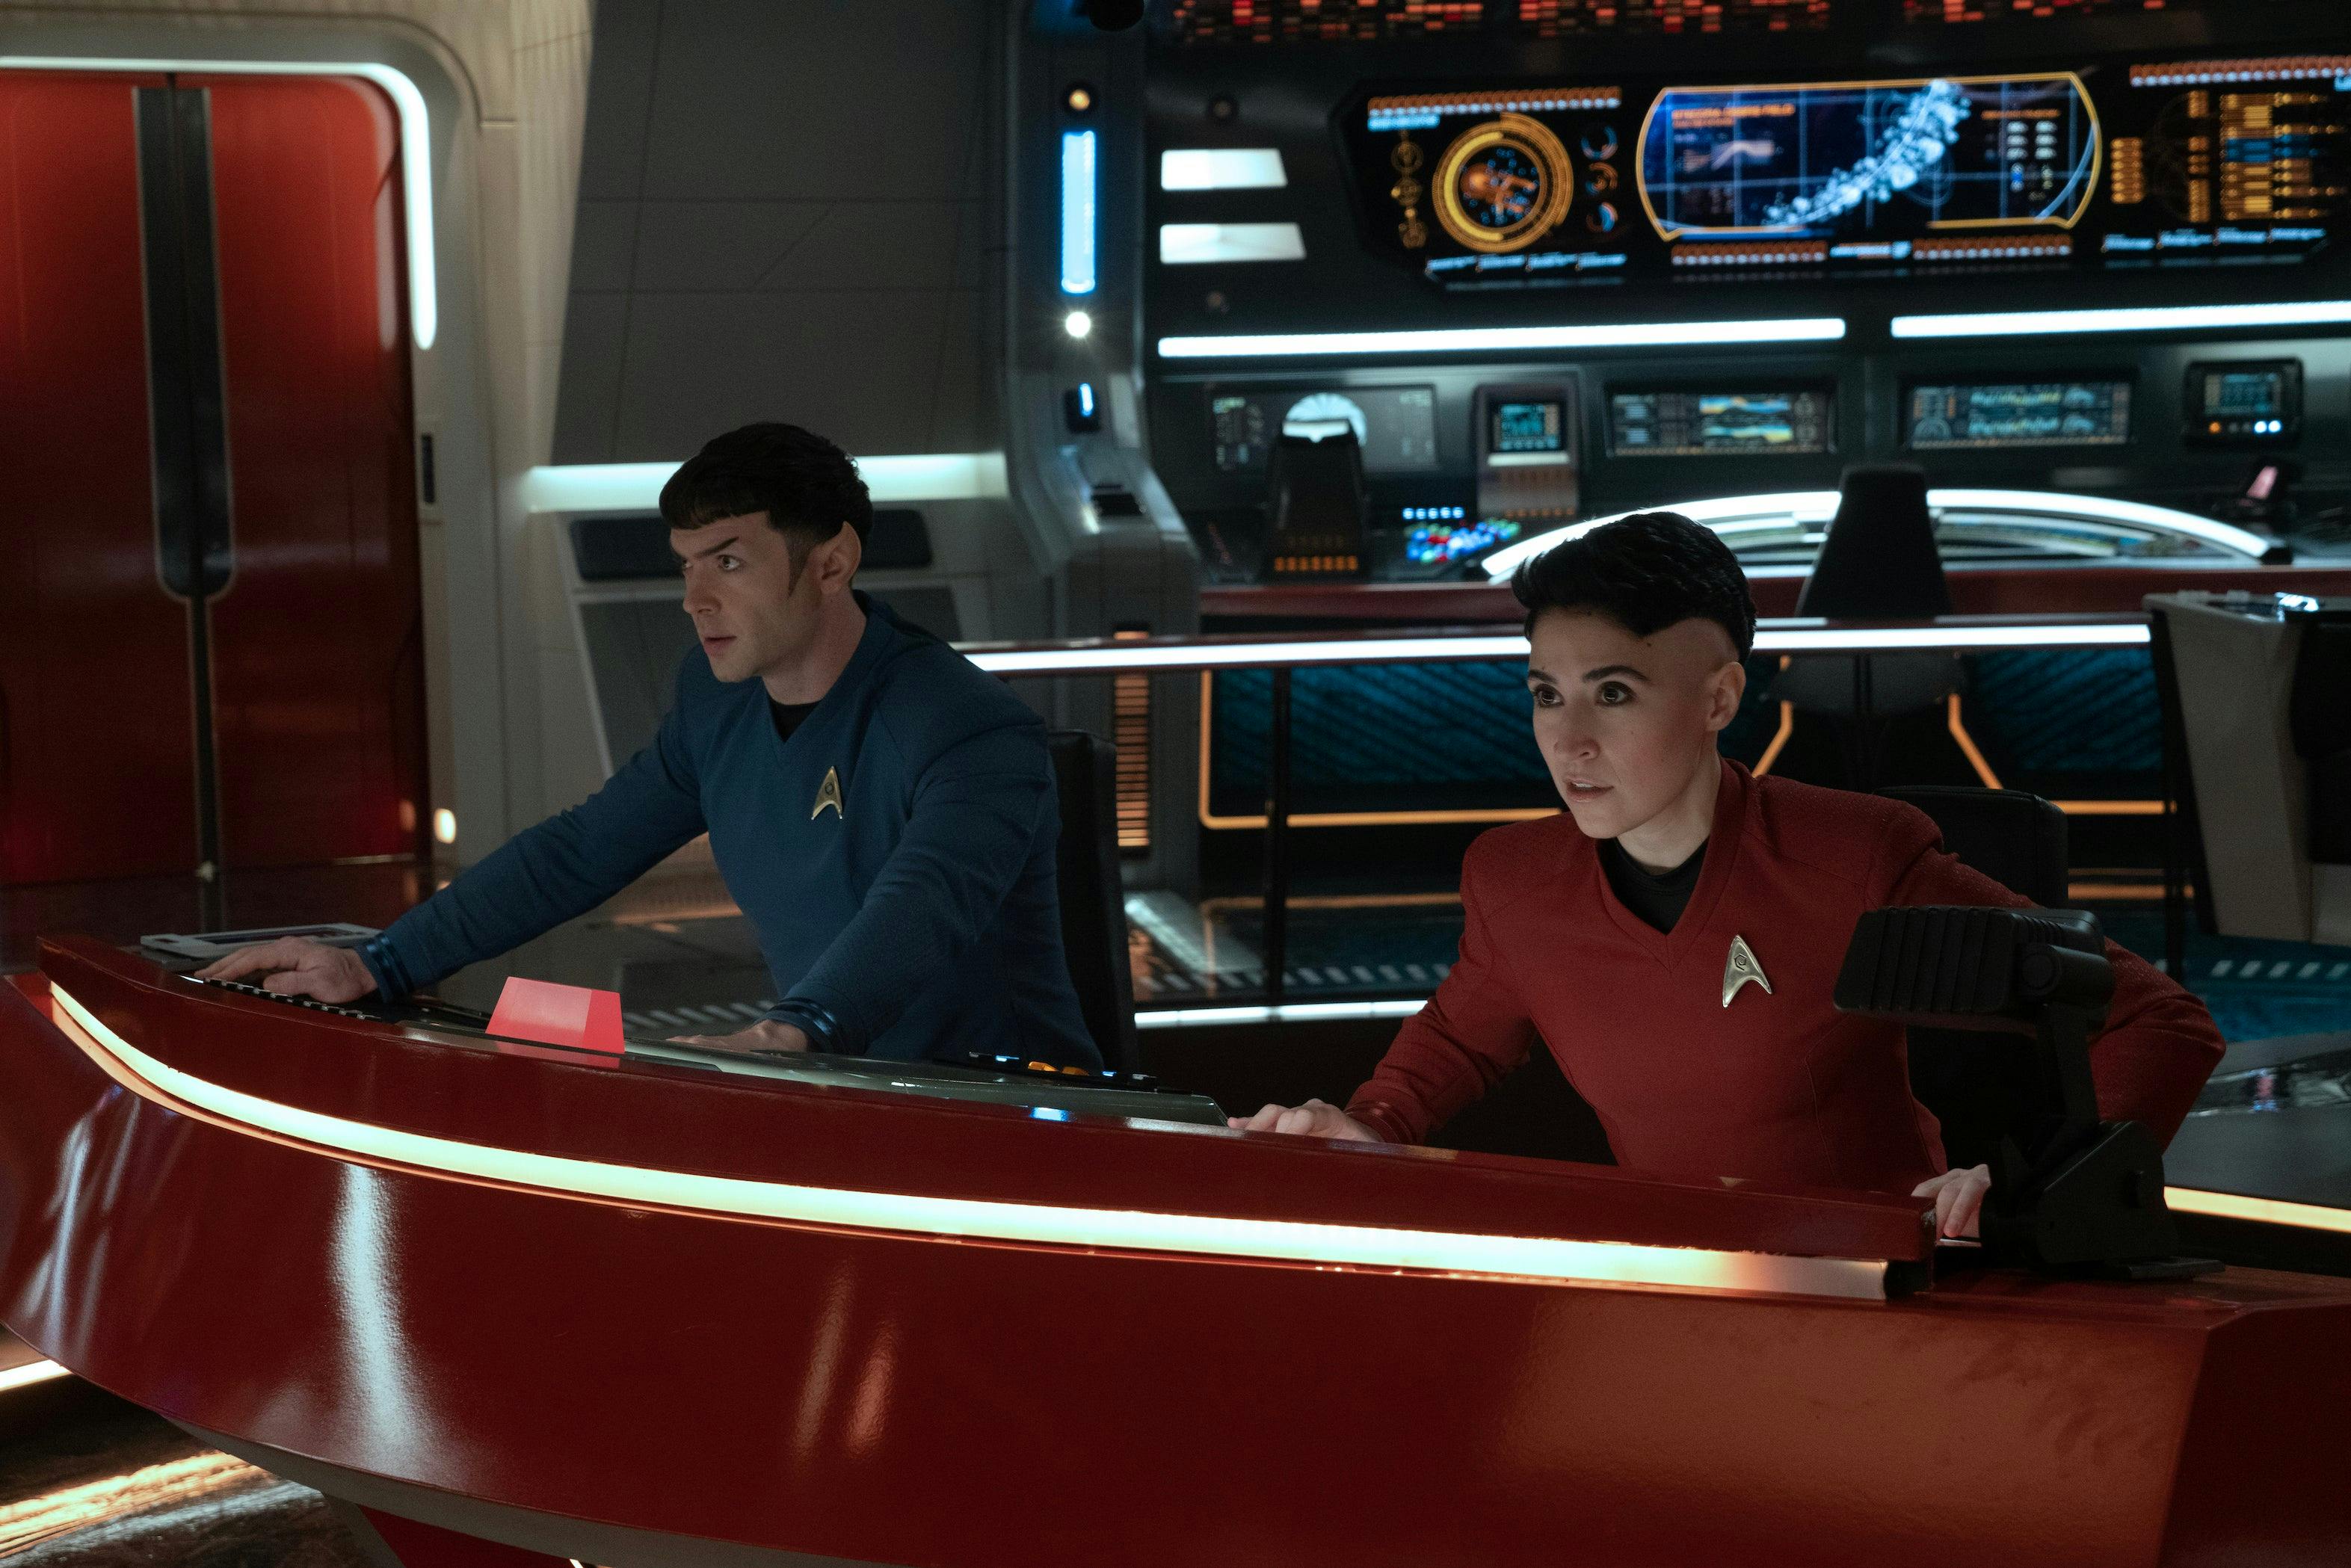 Spock and Erica Ortegas at the Enterprise console in 'Among the Lotus Eaters'